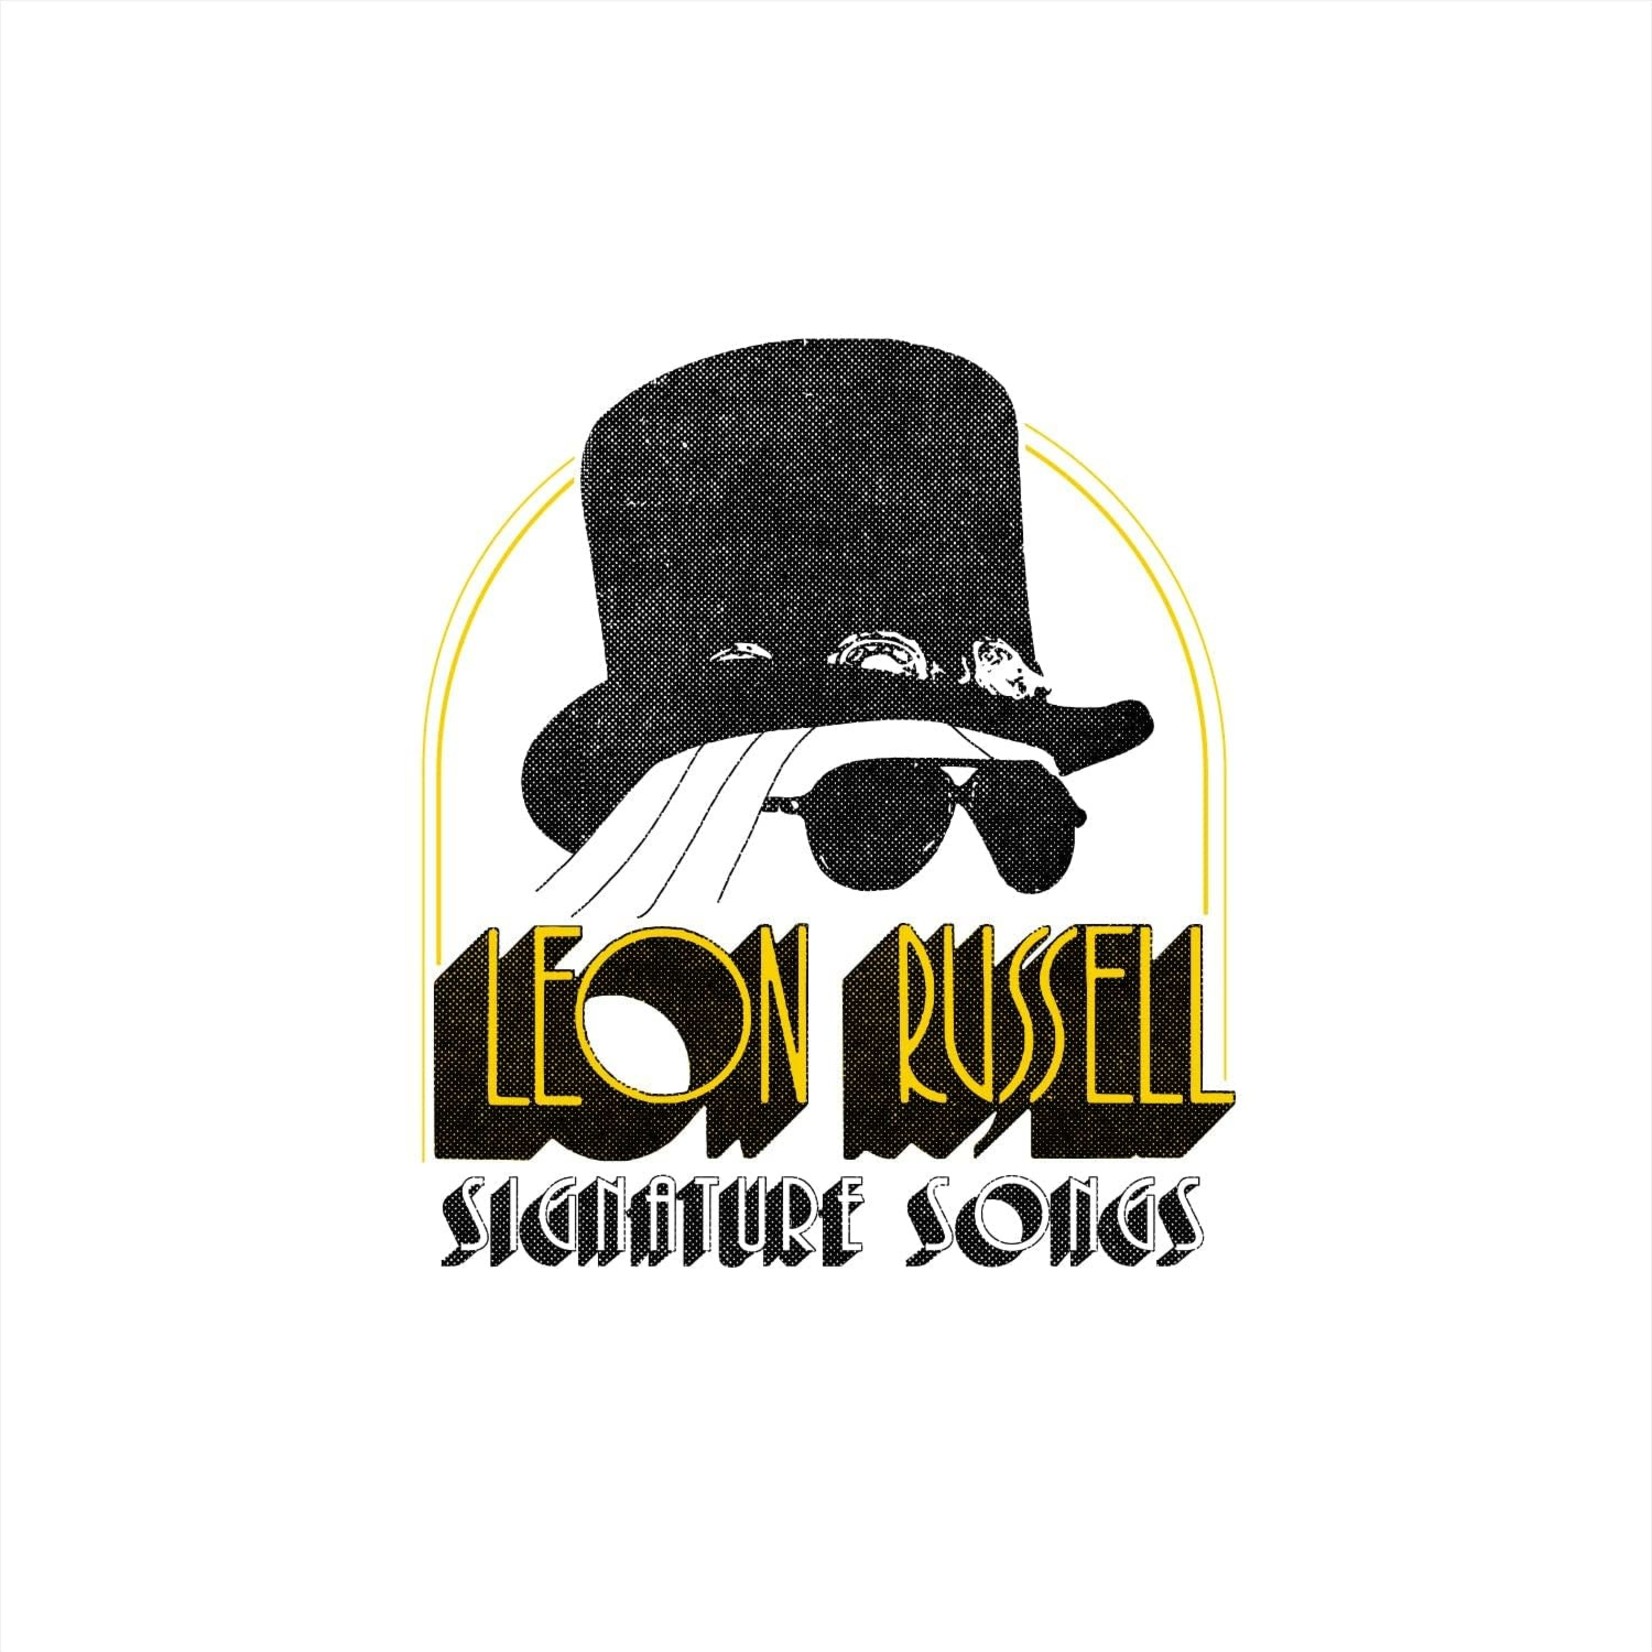 Leon Russell - Signature Songs [LP]